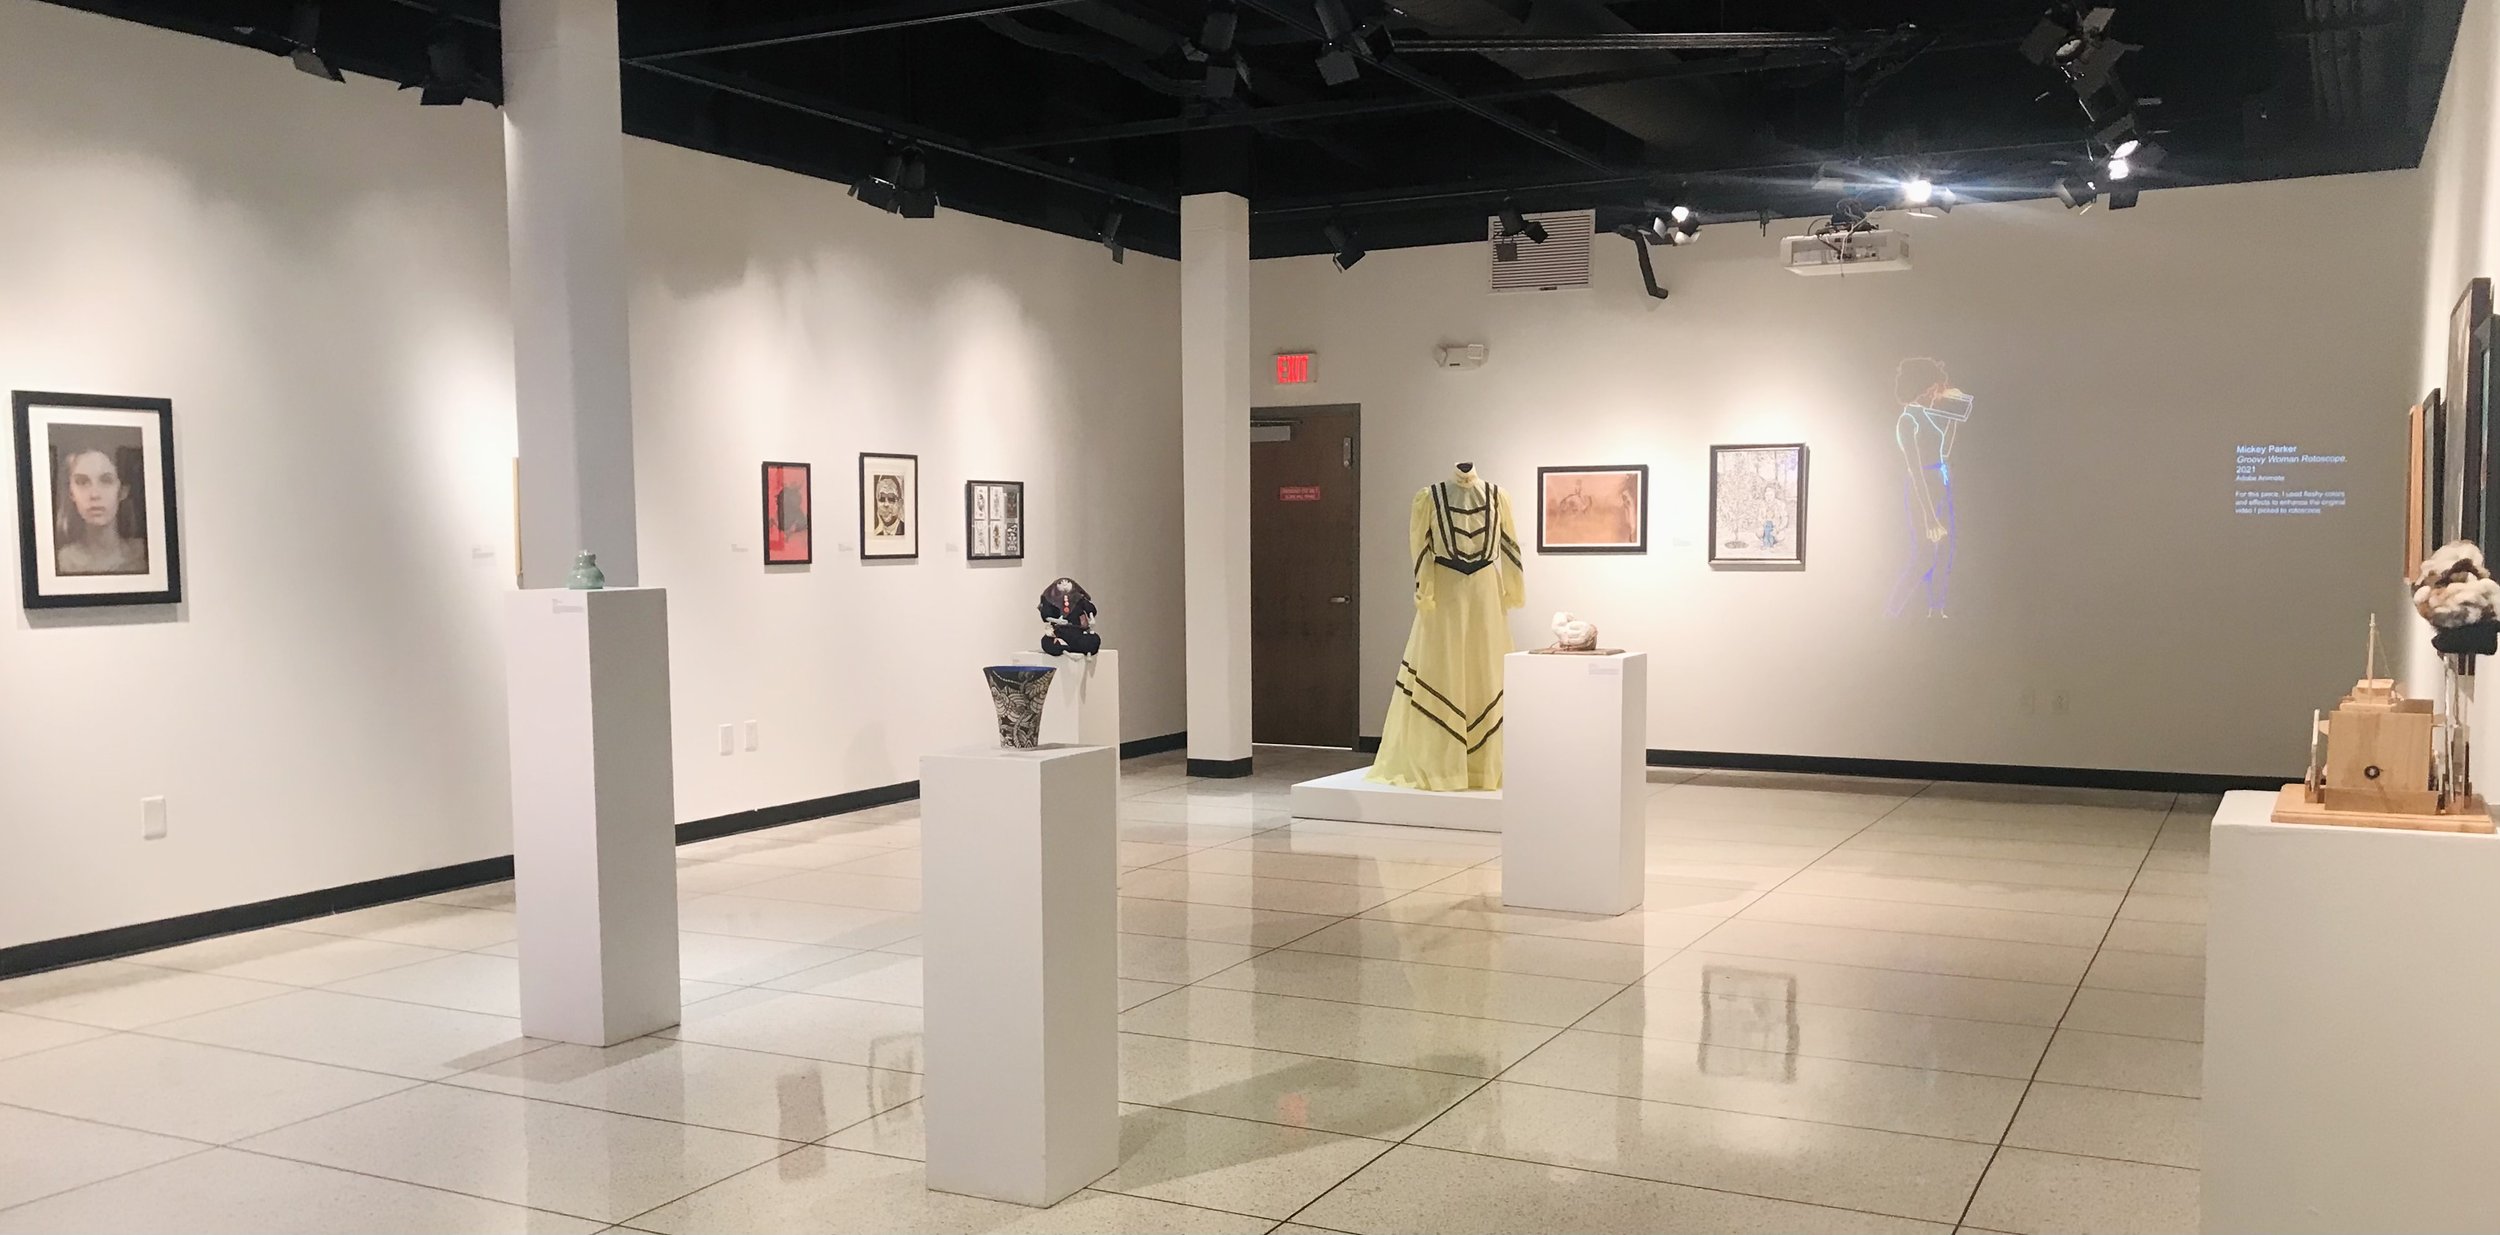  The museum displays and exhibition of various kinds of artwork from students. 